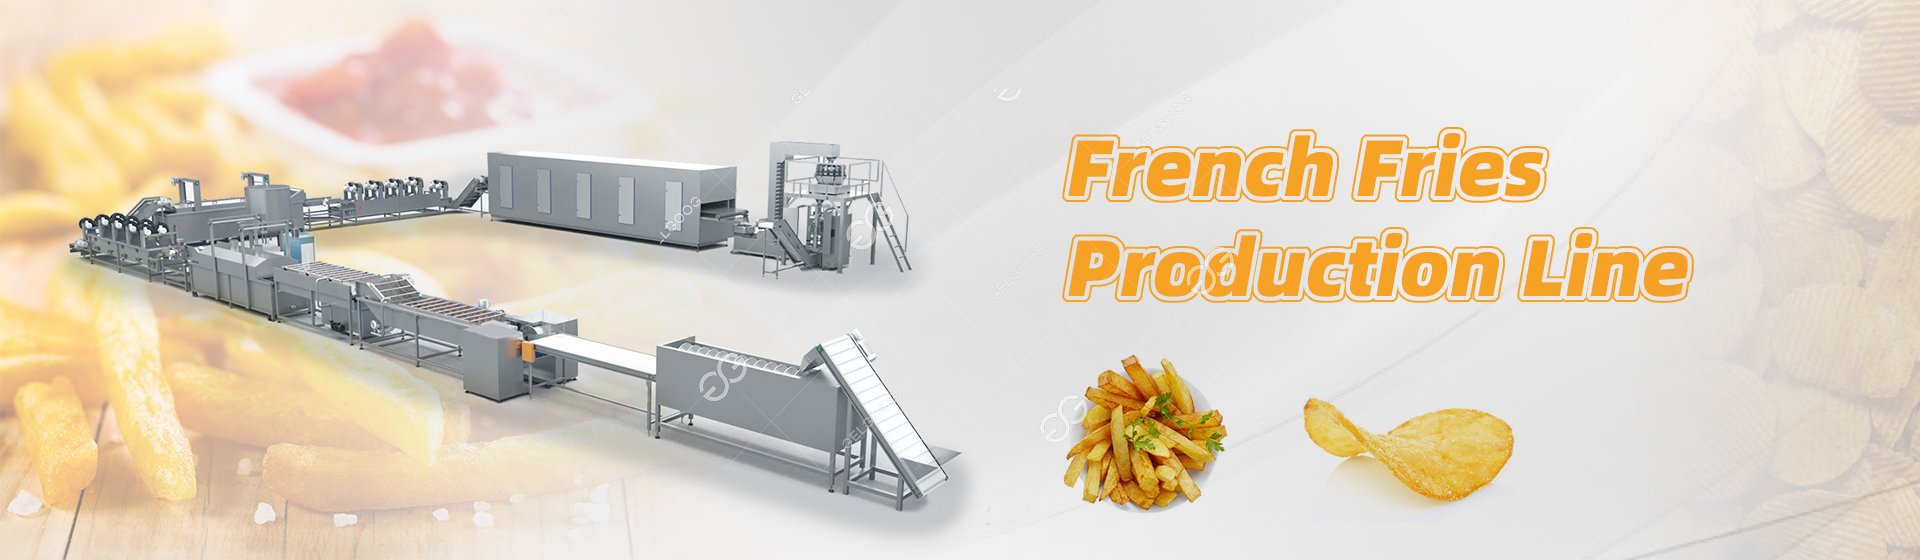 French Fries Production Line  